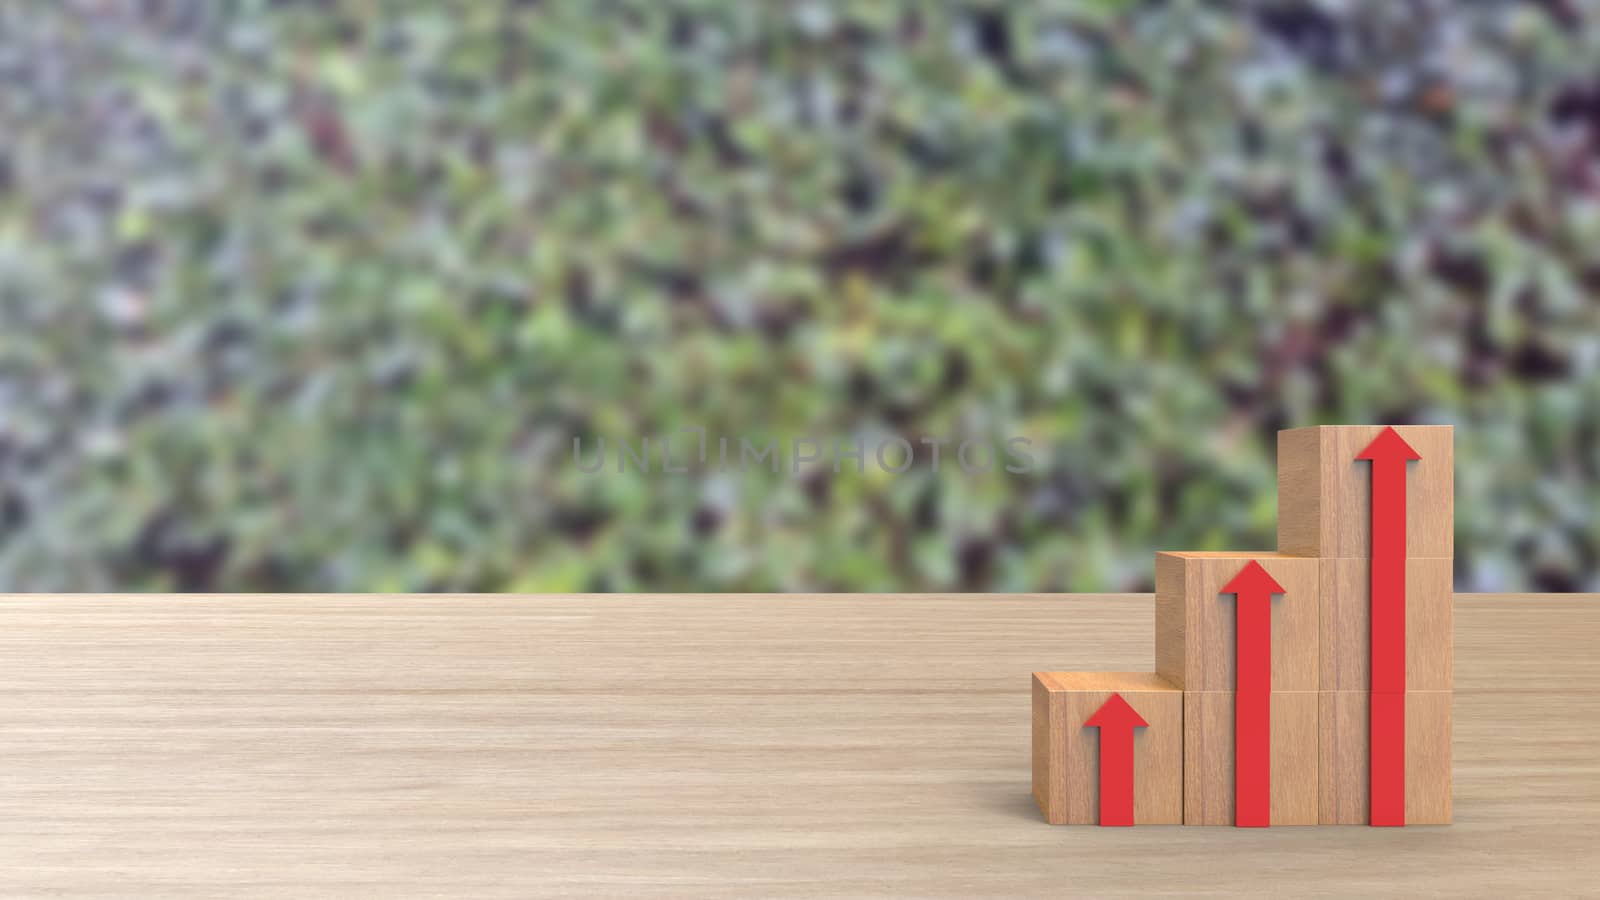 wood block stacking as down stair with red arrow up. Ladder career path concept for business growth success process. On wood wooden table climbing green leaves background HD. Render 3d illustration